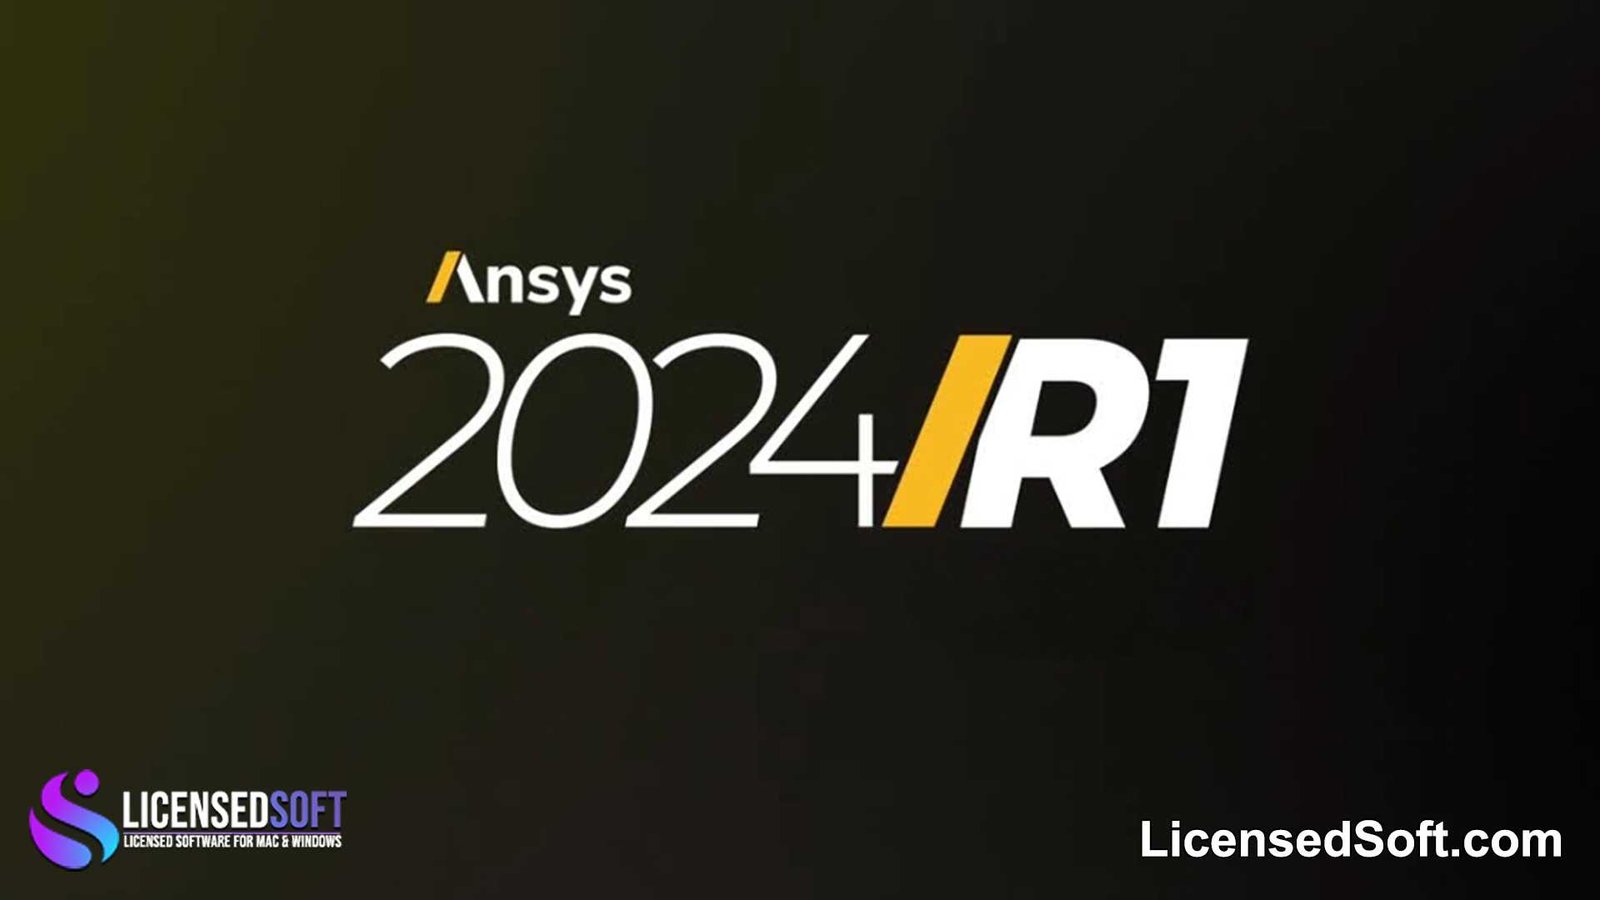 ANSYS Products 2024 R1 Perpetual License By LicensedSoft